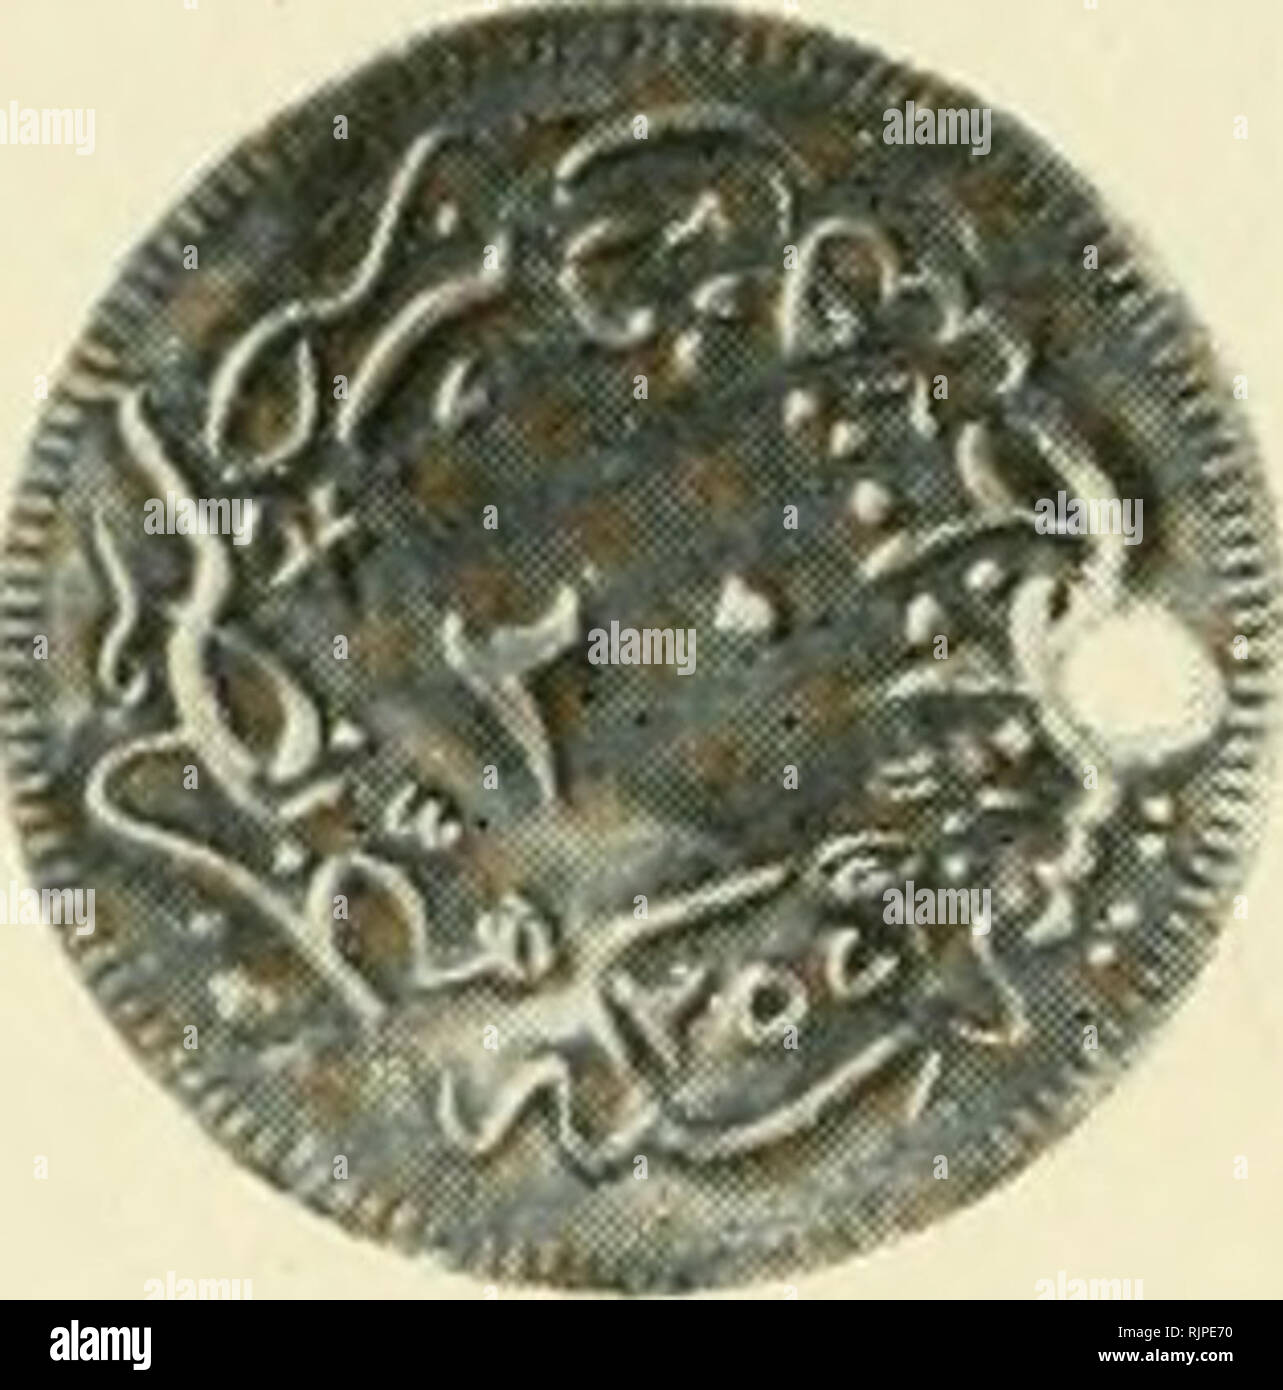 The Australian Museum magazine. Natural history. (1) Chinese Knife Money.&quot; Chinese &quot; Spade Money.&quot; (3) Bronze Crown of James 1690. (4) Turkish Coin with kalima, 18.^9. ;5)